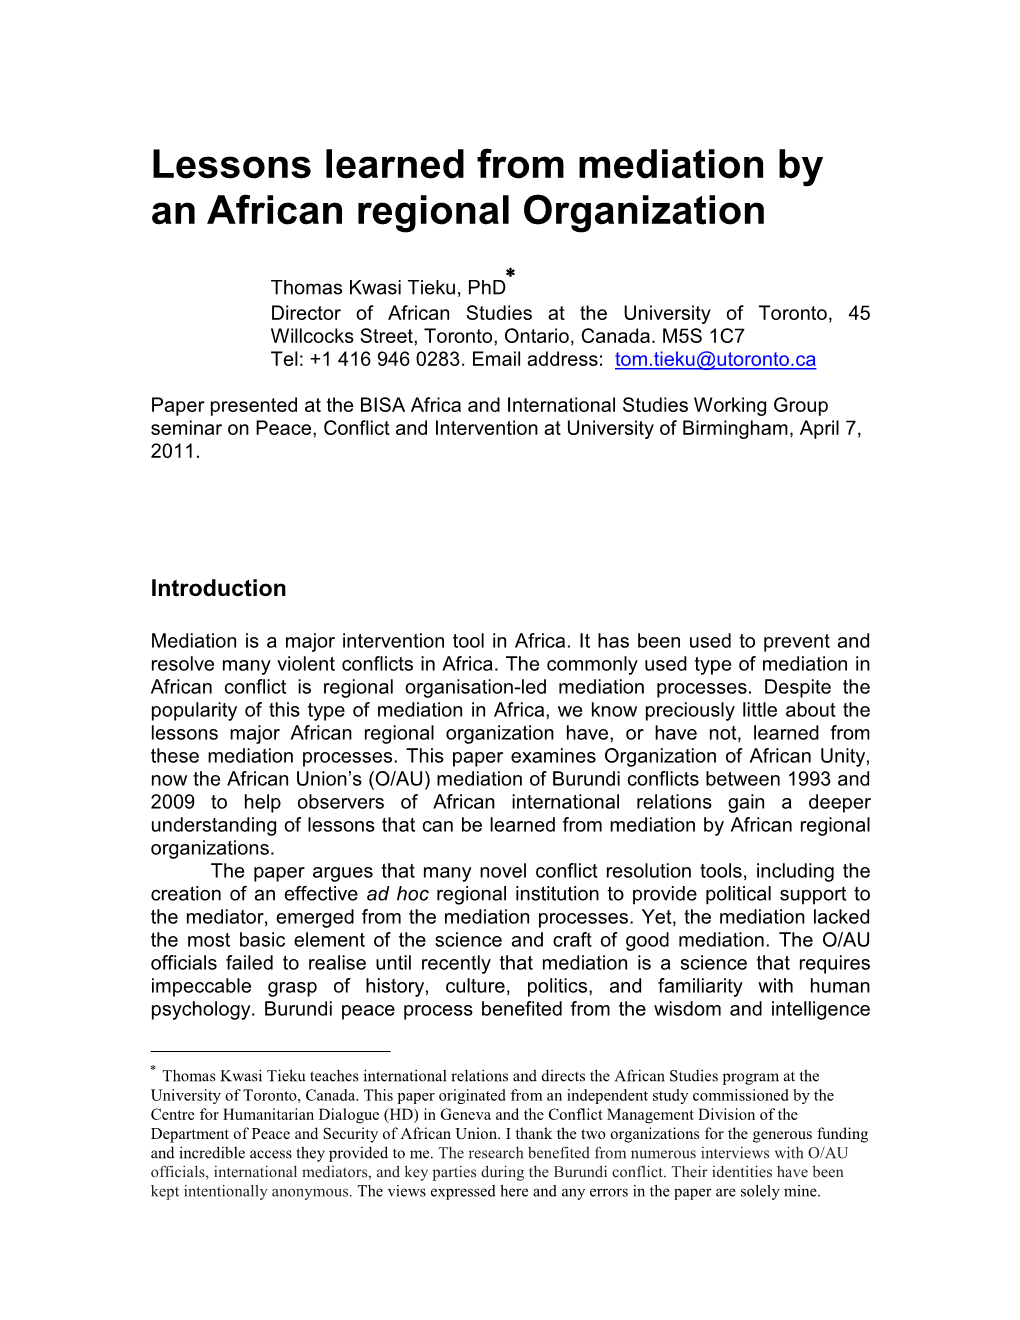 Lessons Learned from Mediation by an African Regional Organization